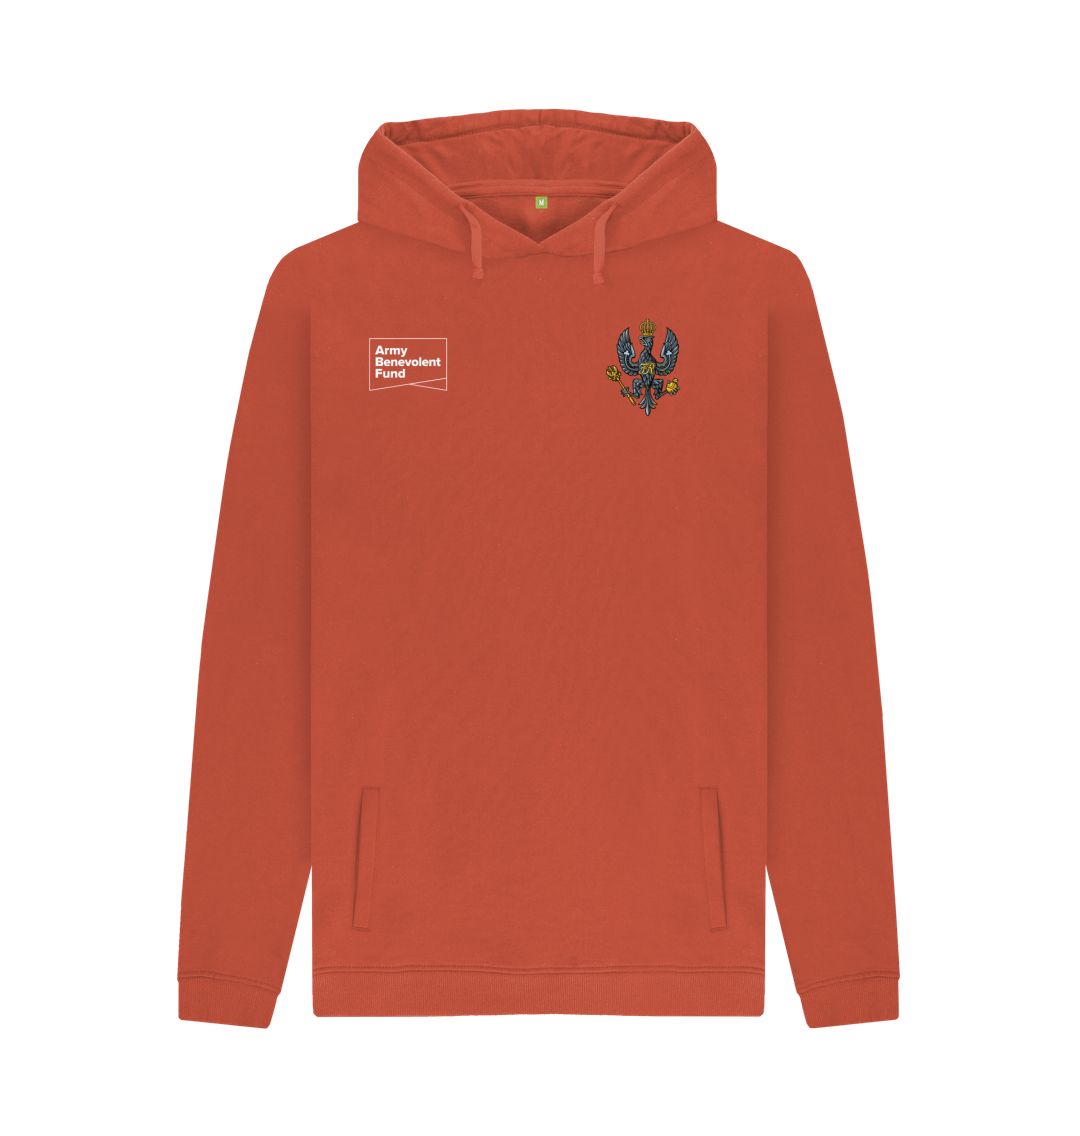 The King's Royal Hussars Unisex Hoodie - Army Benevolent Fund